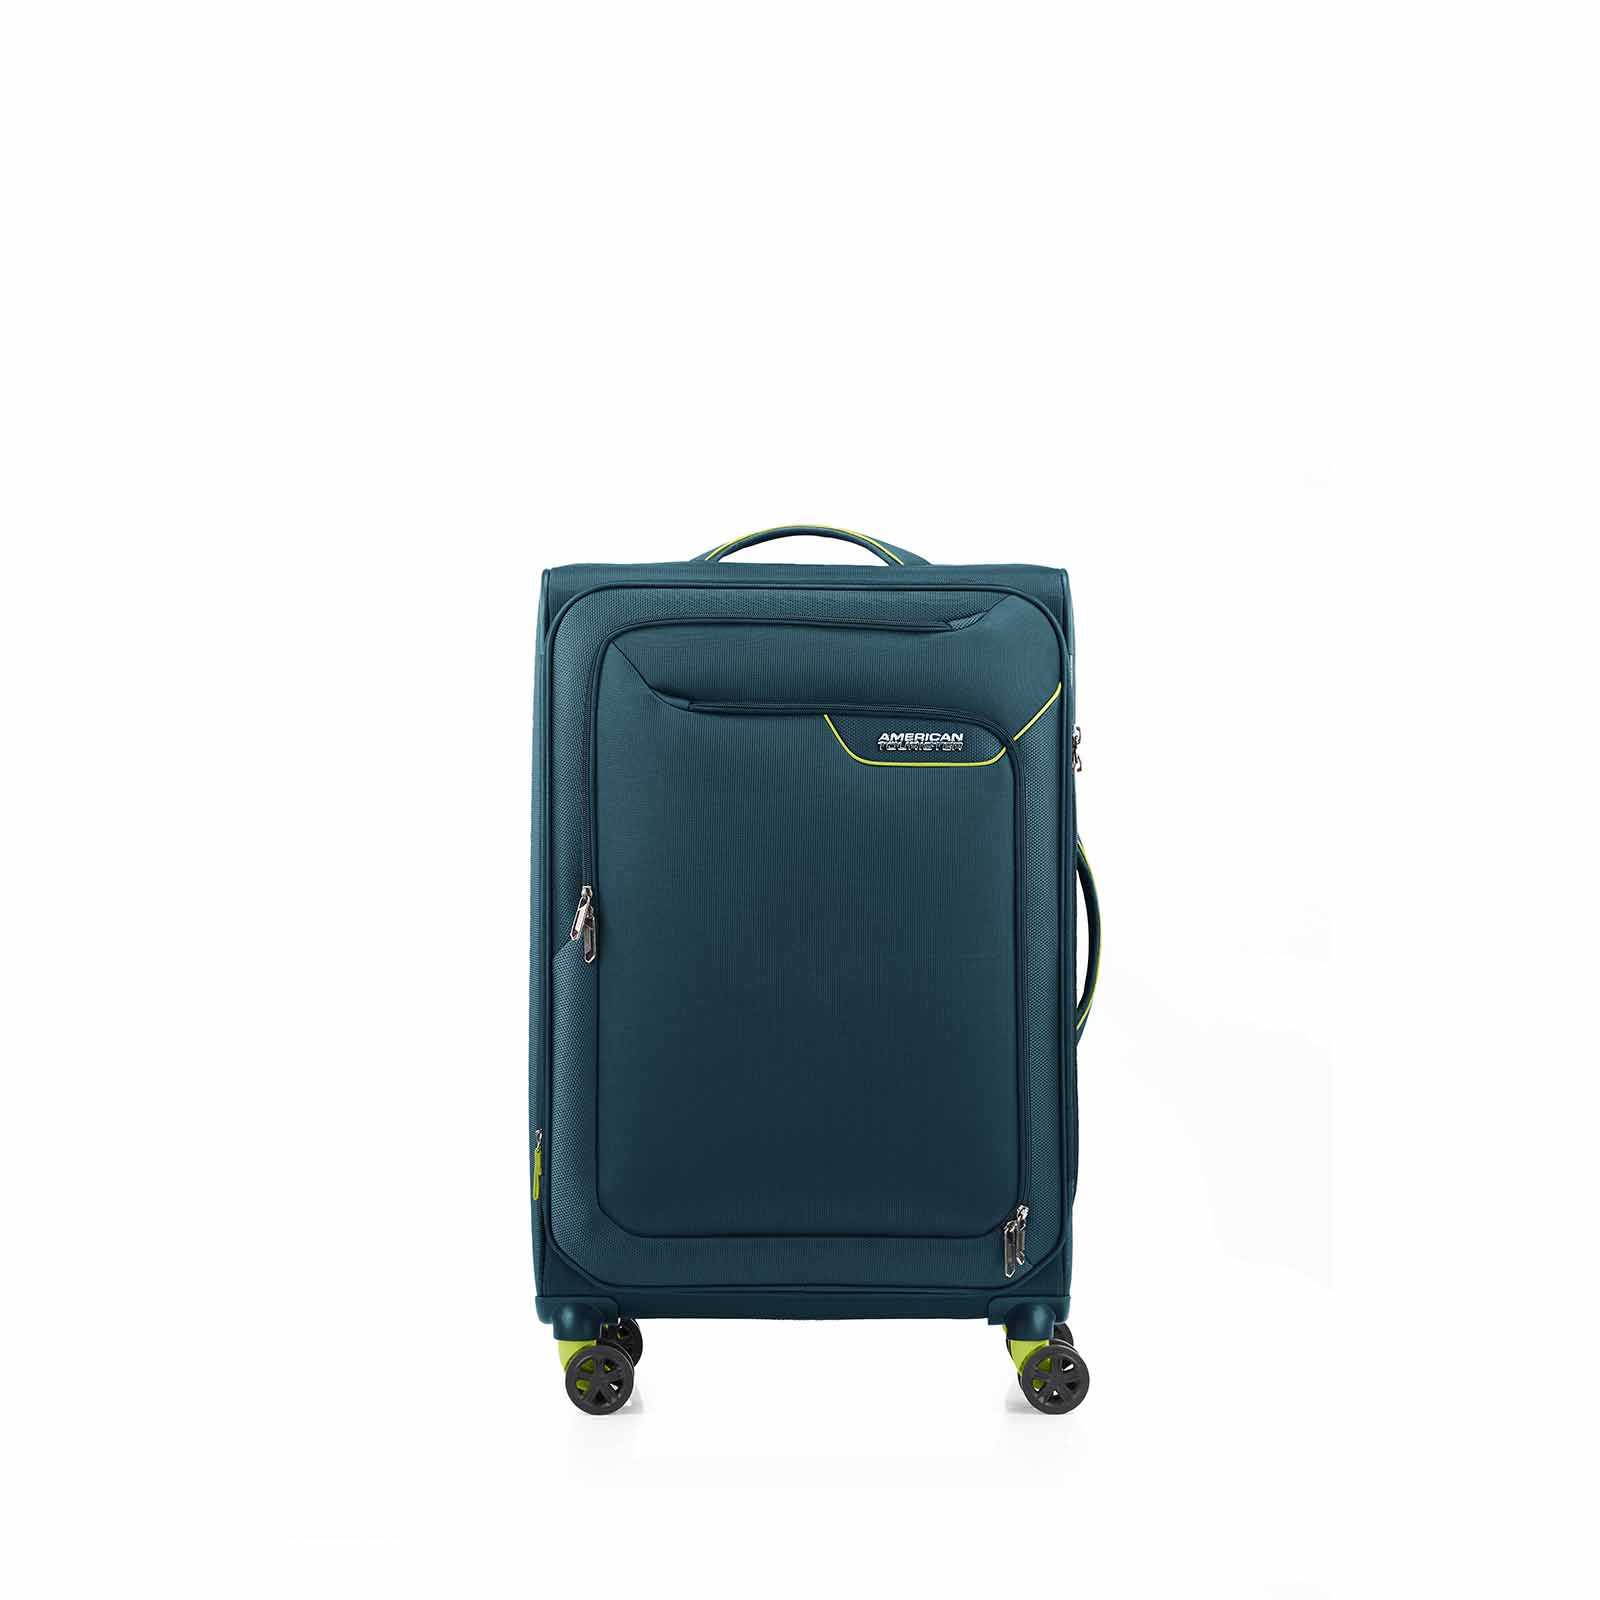 American-Tourister-Applite-4-Eco-71cm-Suitcase-Varsity-Green-Front